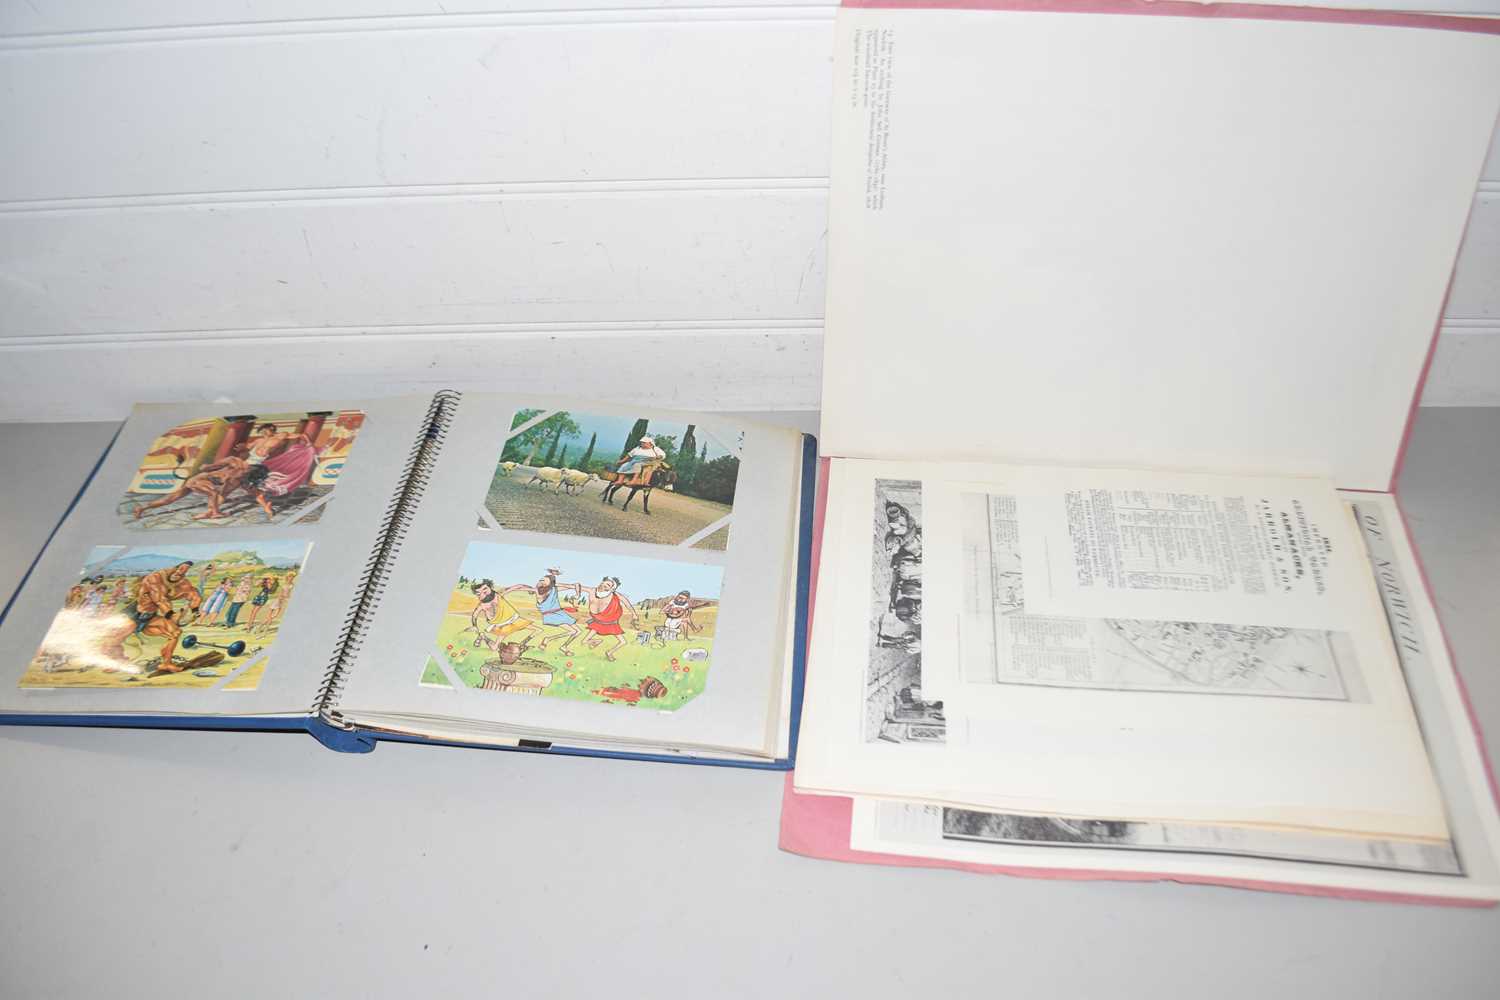 Jarrolds of Norwich Book of East Anglian Prints and Documents together with a album of 20th